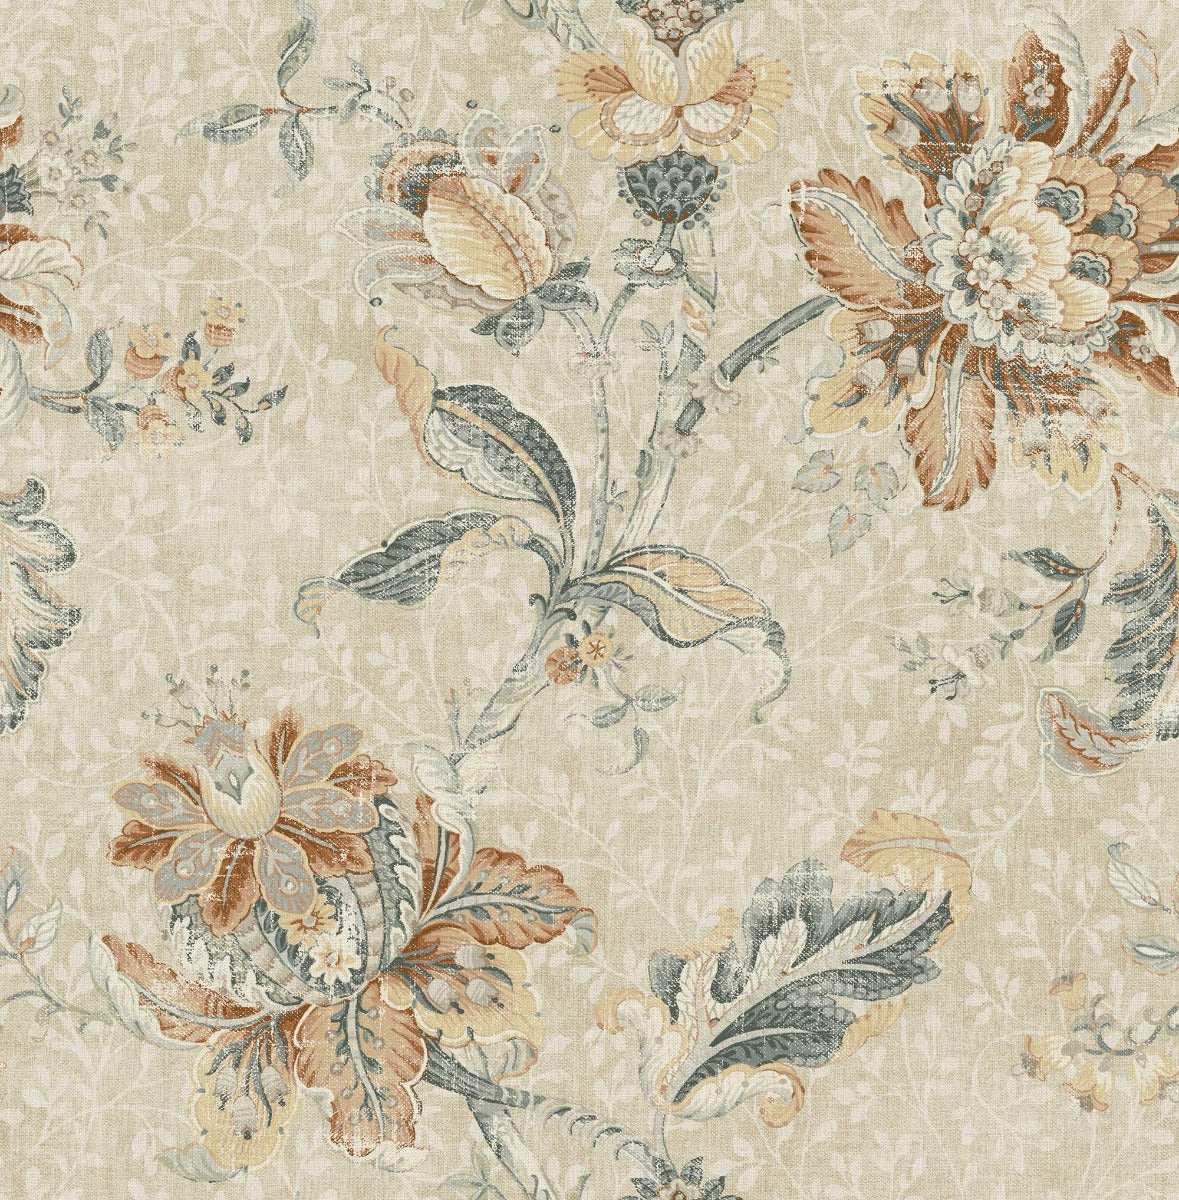 Jacobean Floral Damask, Beige and Chocolate Brown Tissue Paper